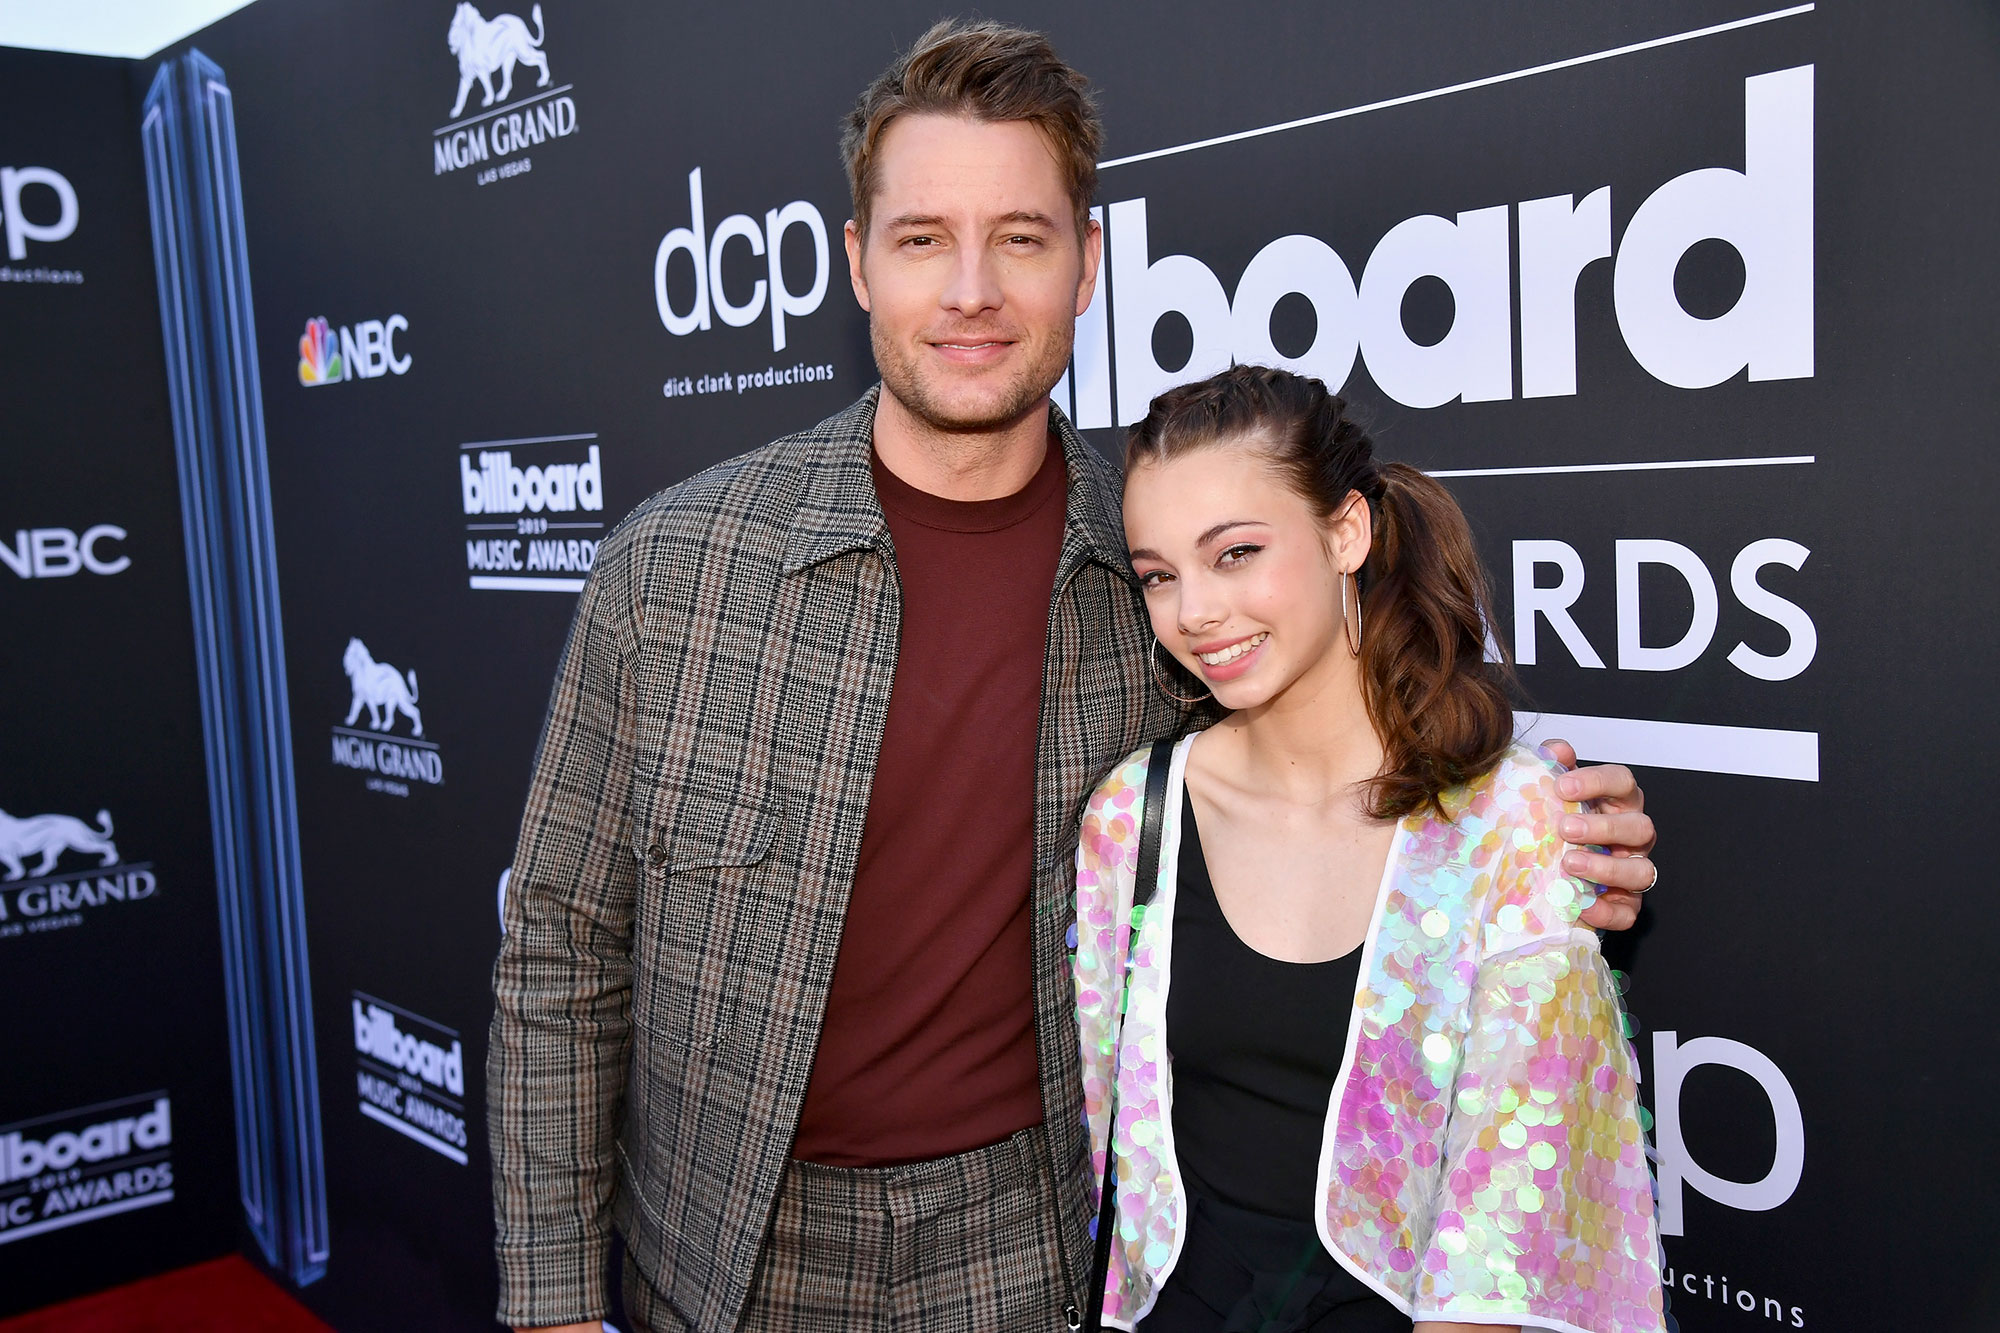 Justin Hartley's Bond With Daughter Isabella ‘My Best Friend’